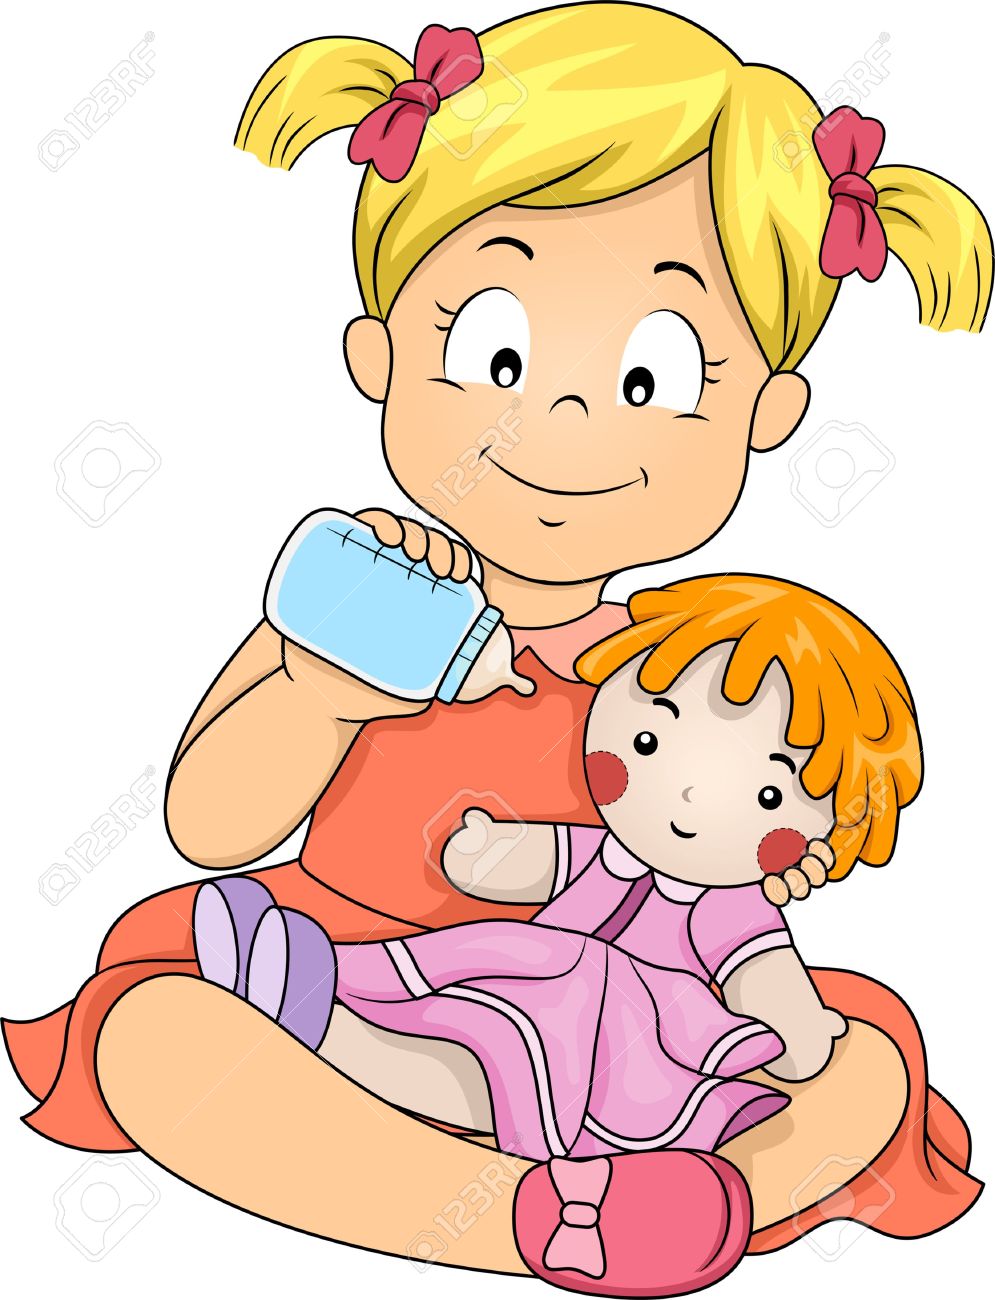 doll clipart free - photo #28